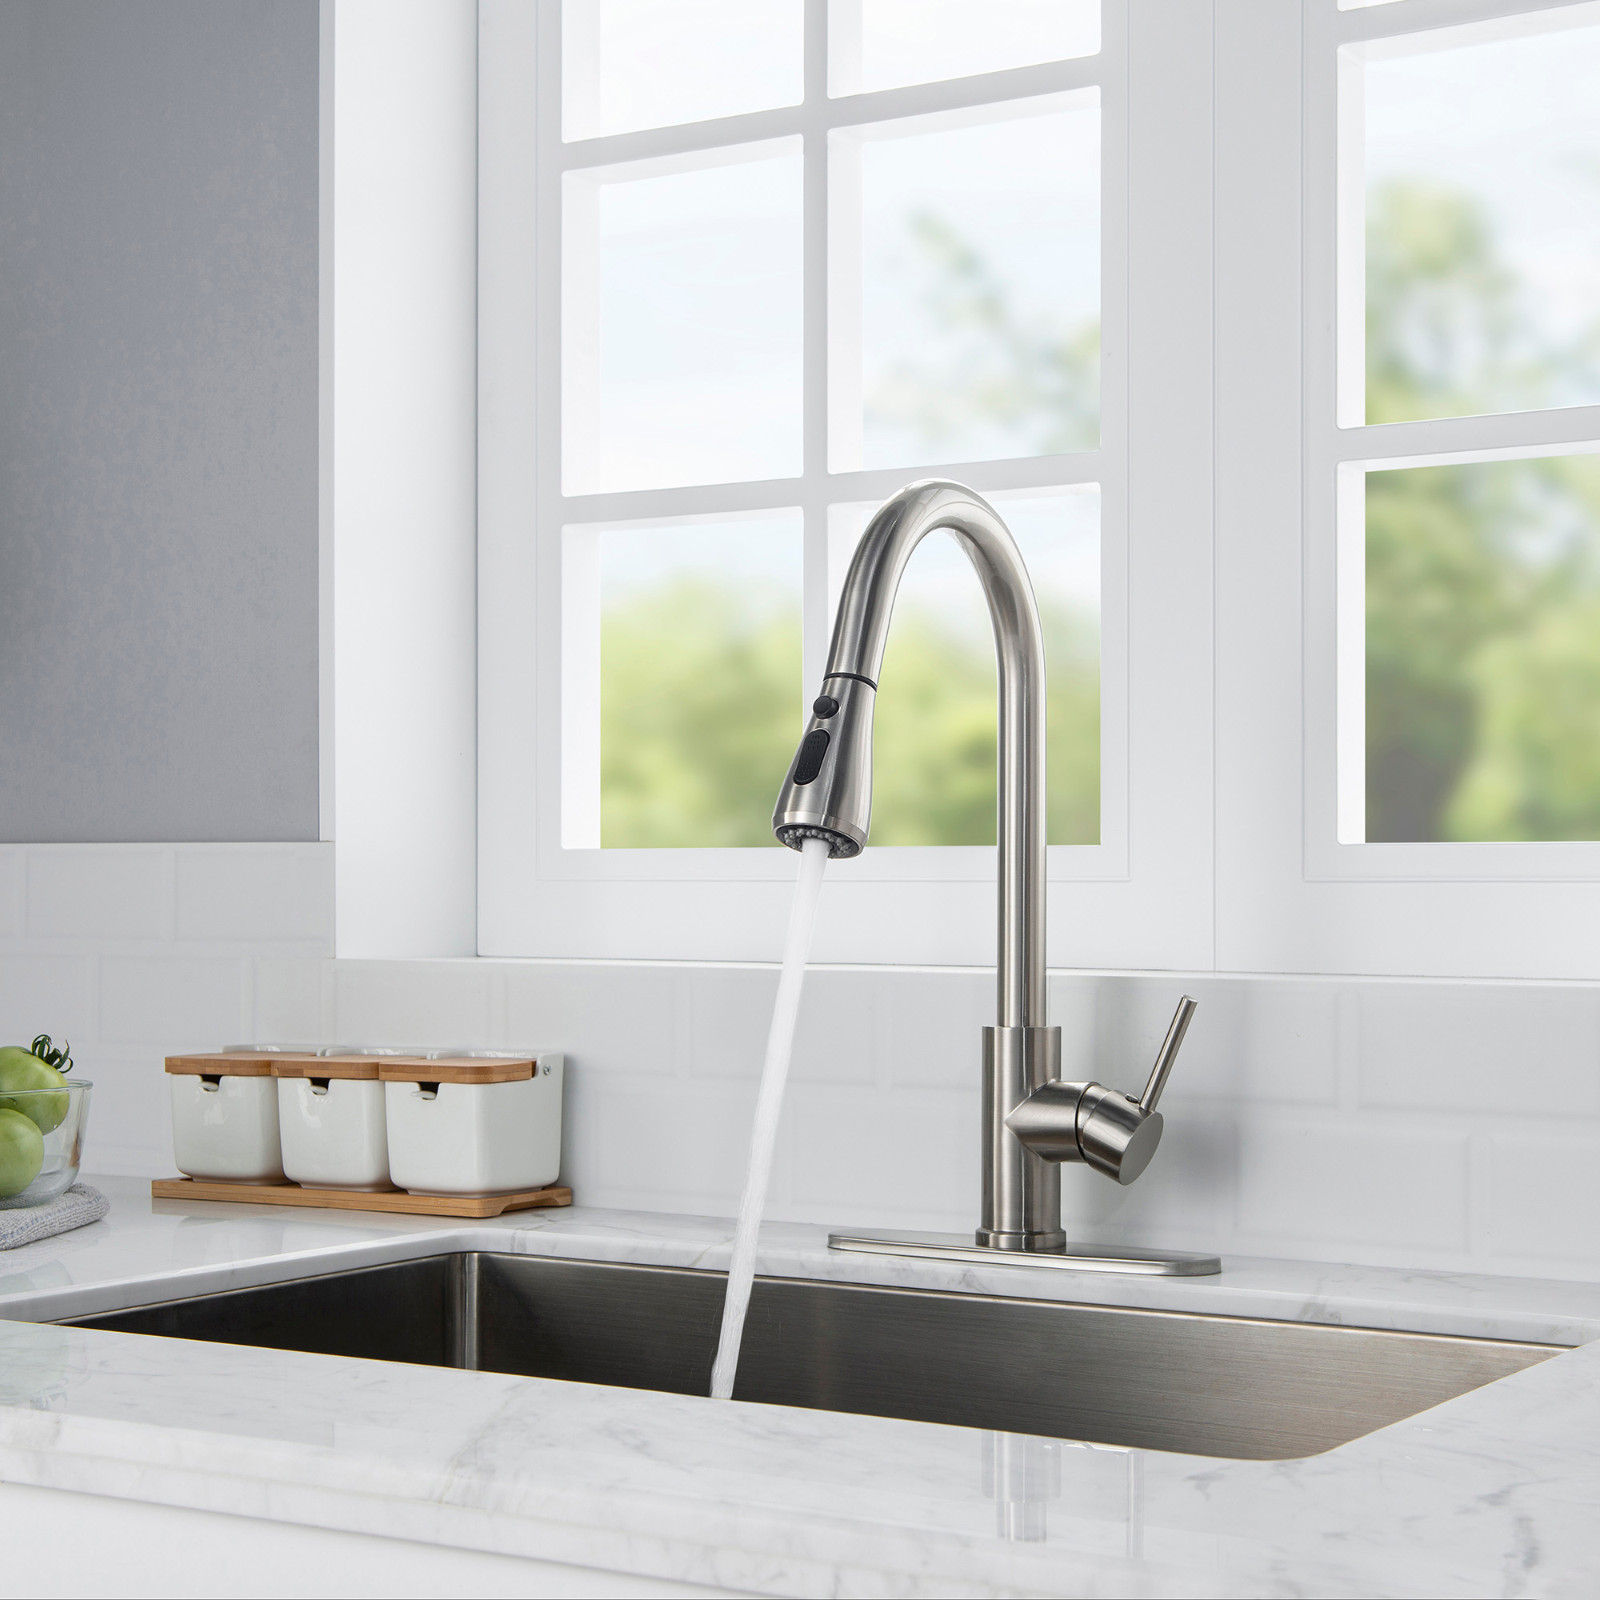  WOODBRIDGE WK090801BN Stainless Steel Single Handle Pull Down Kitchen Faucet in Brushed Nickel Finish._9393